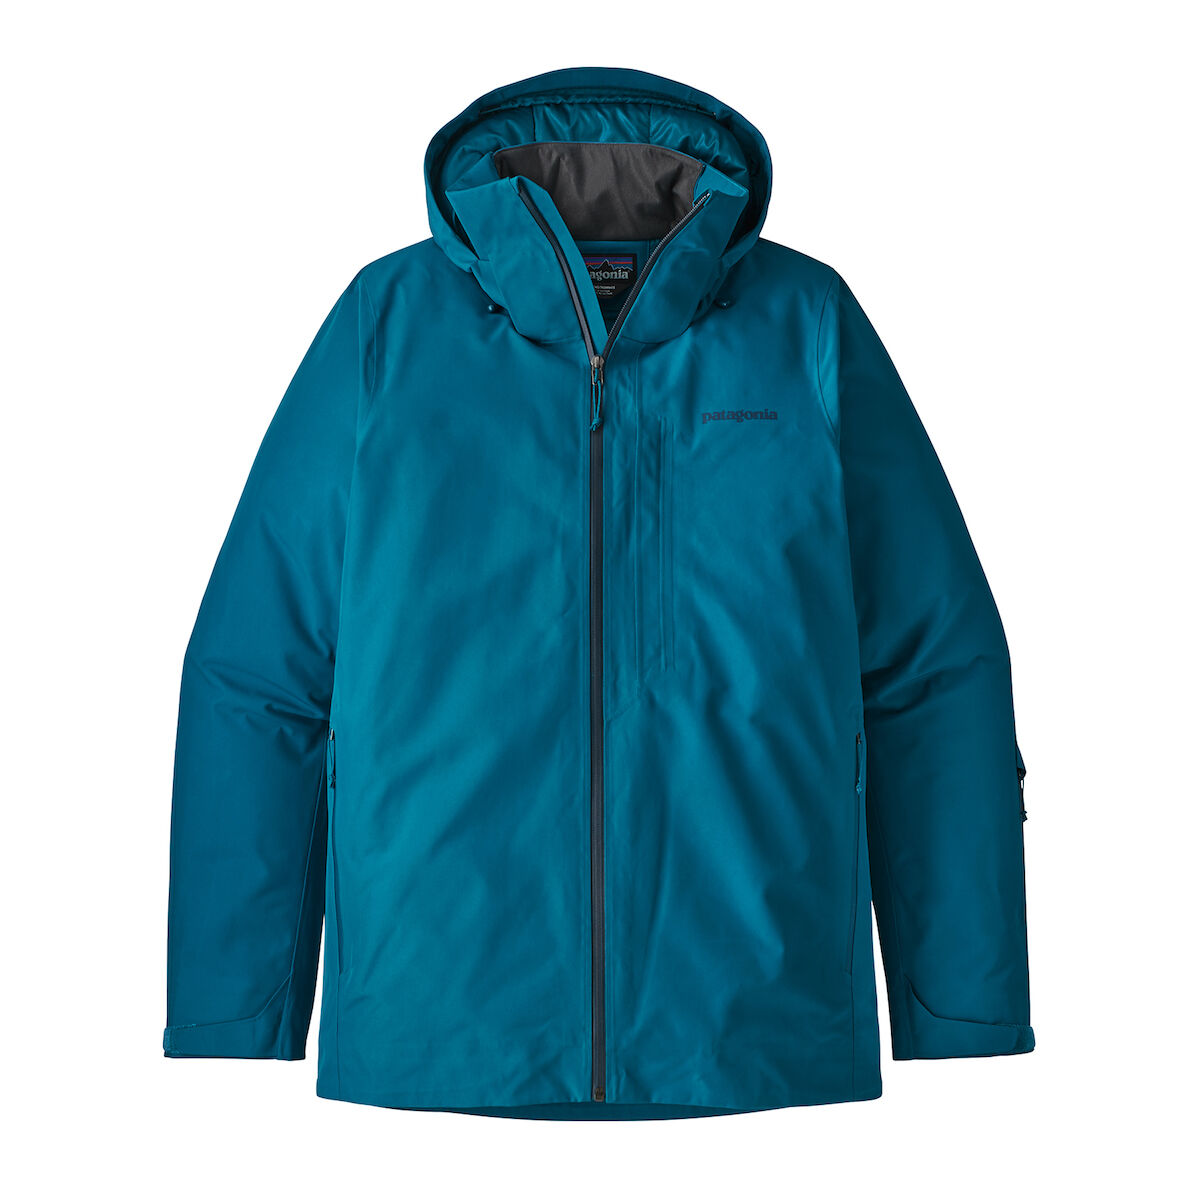 Patagonia - Insulated Powder Bowl Jkt - Chaqueta impermeable - Hombre